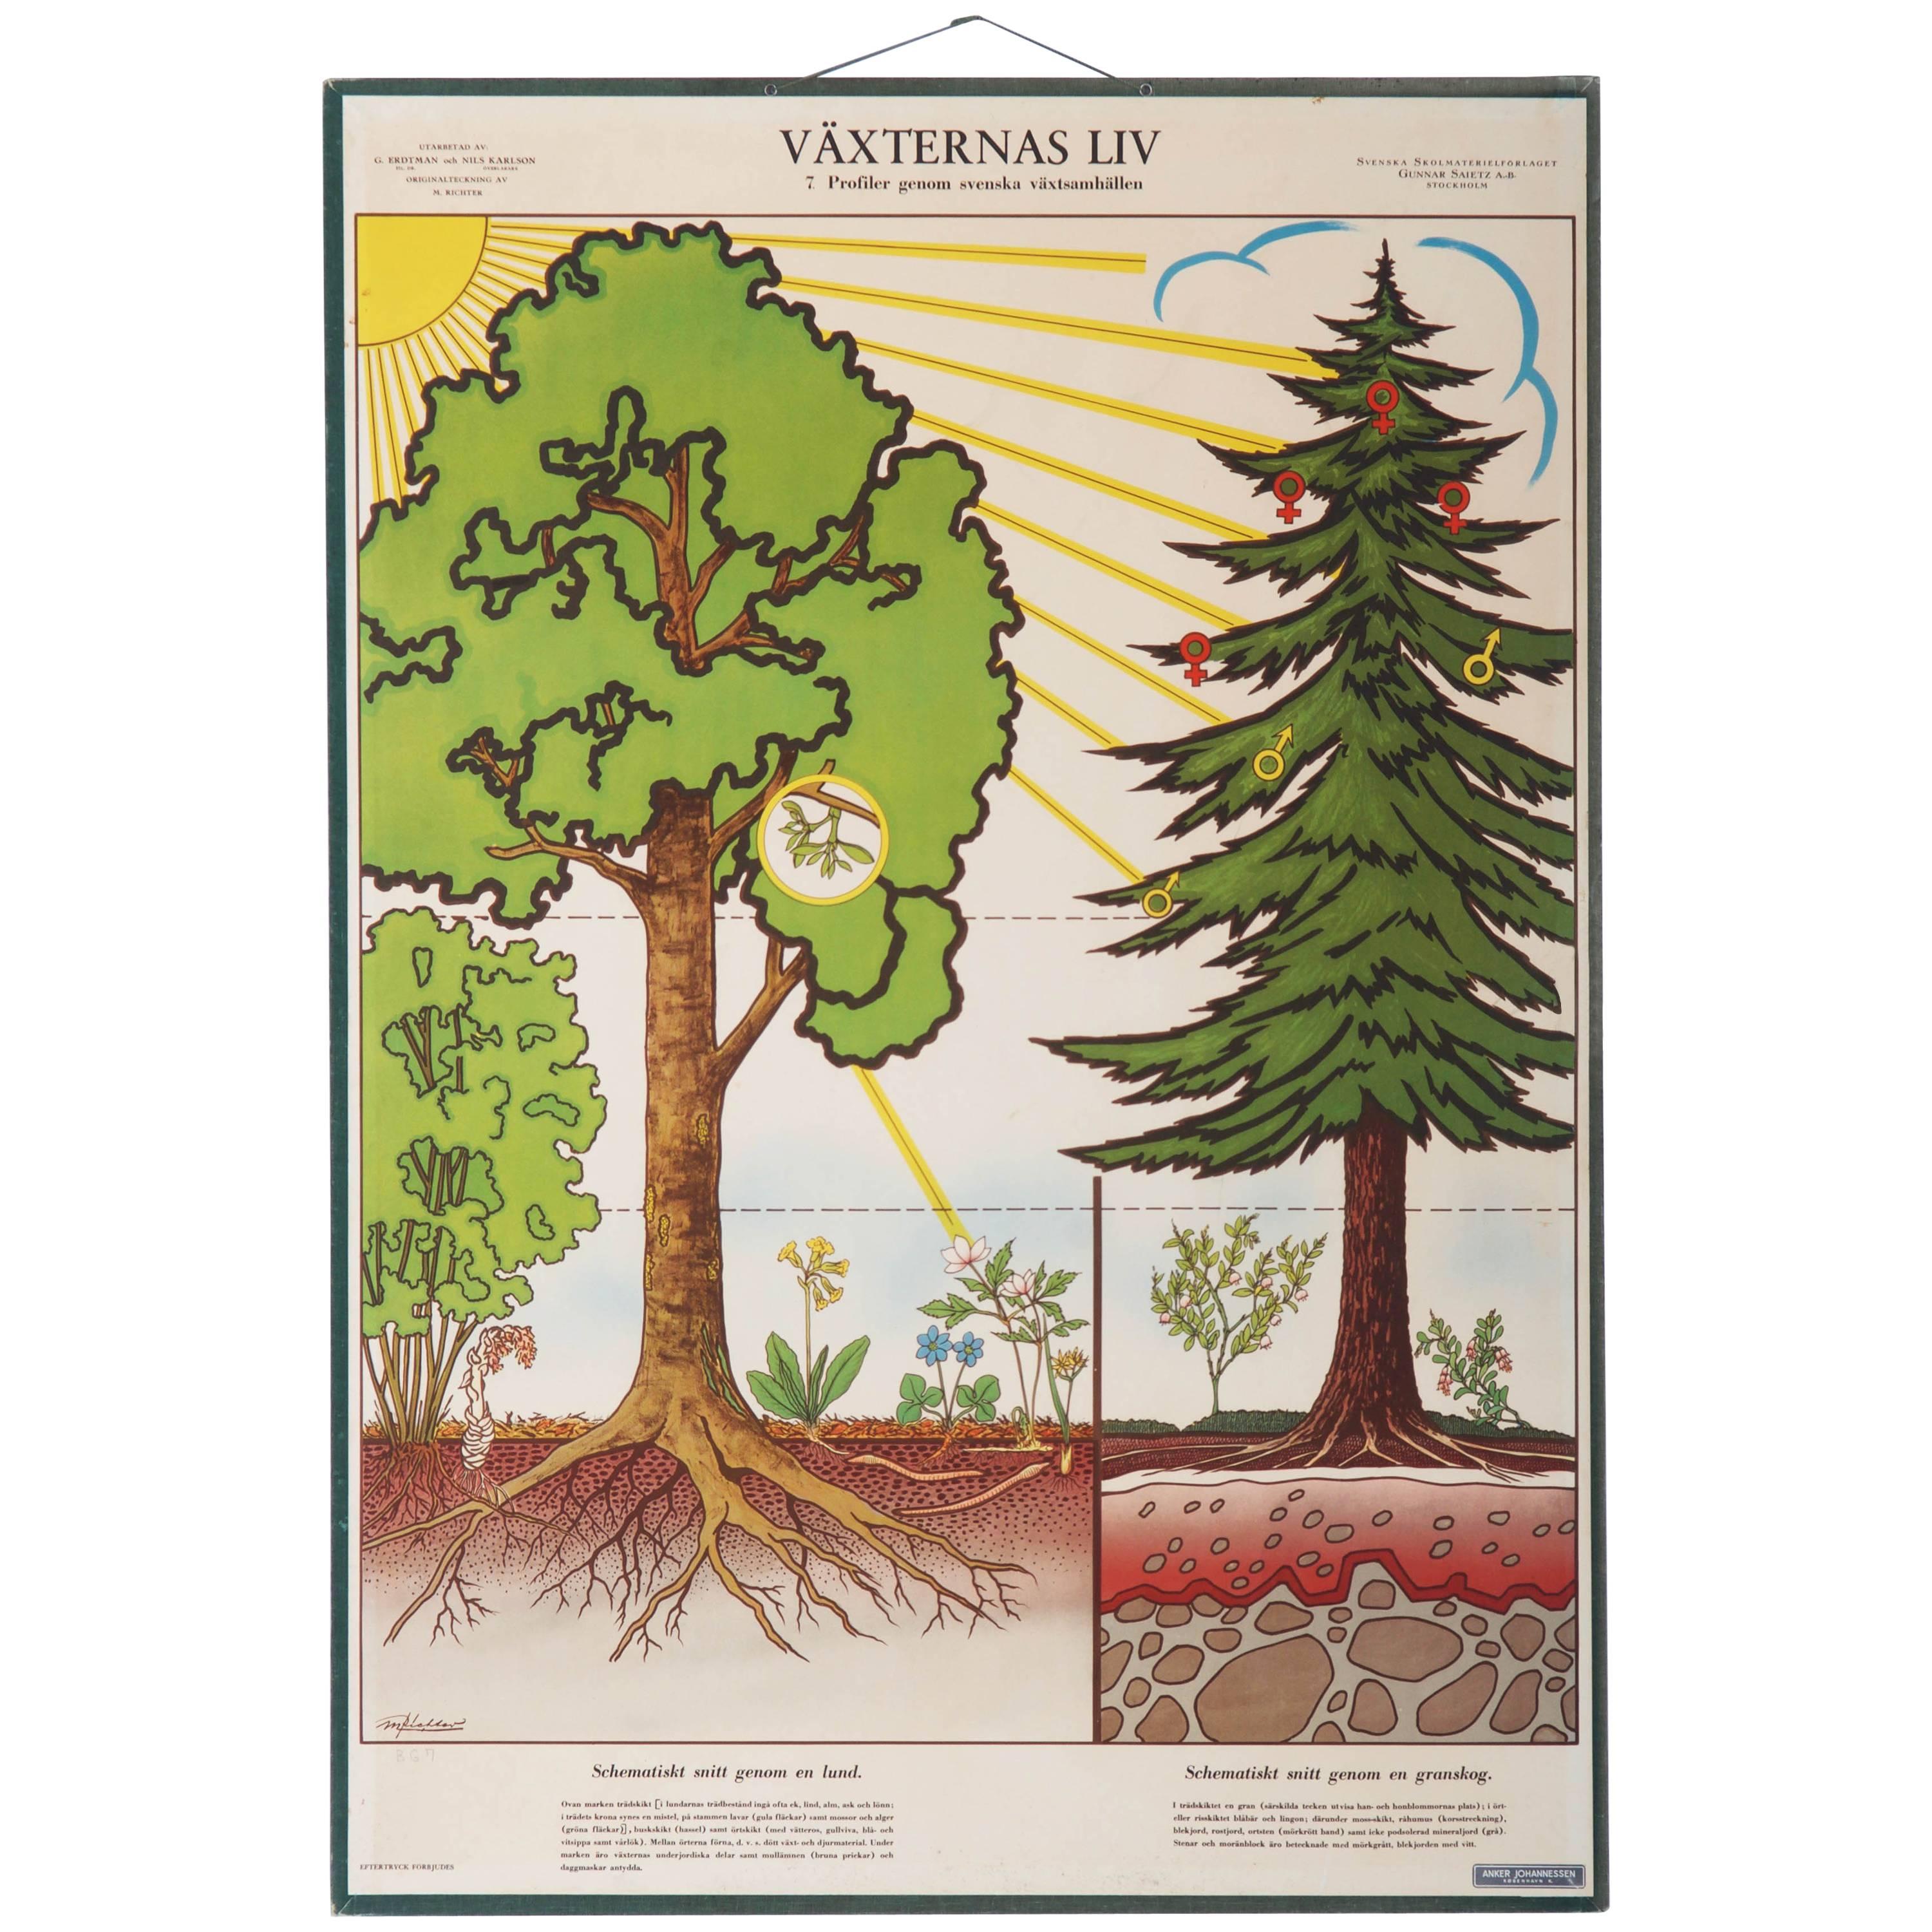 Antique Swedish School, Teaching Chart, Poster "the Life of the Plants"